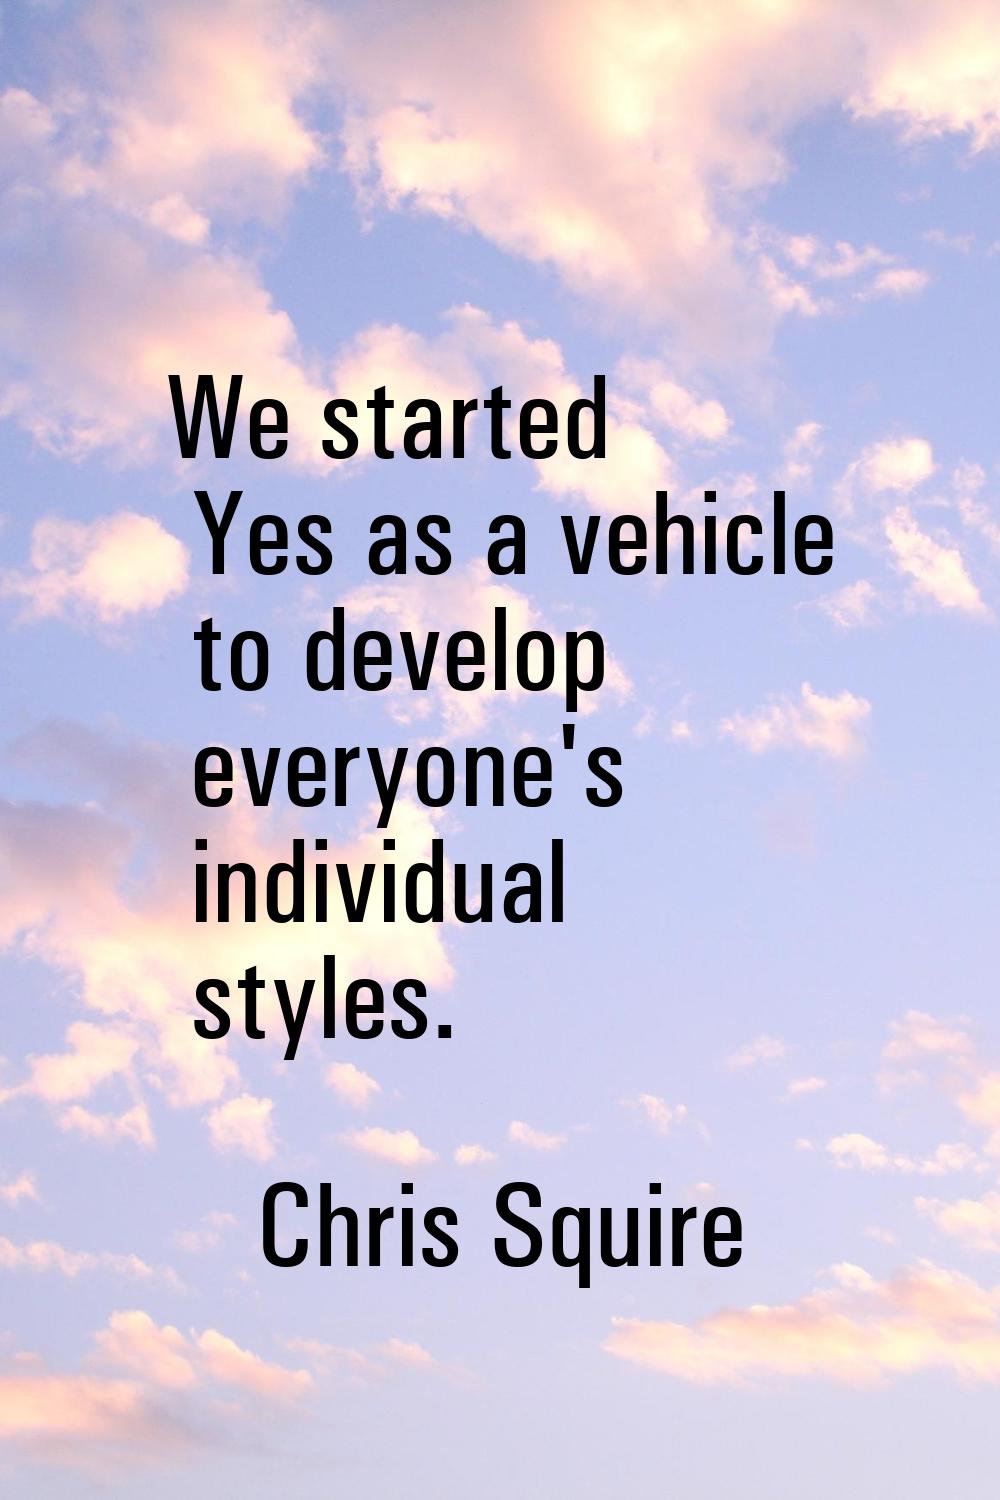 We started Yes as a vehicle to develop everyone's individual styles.